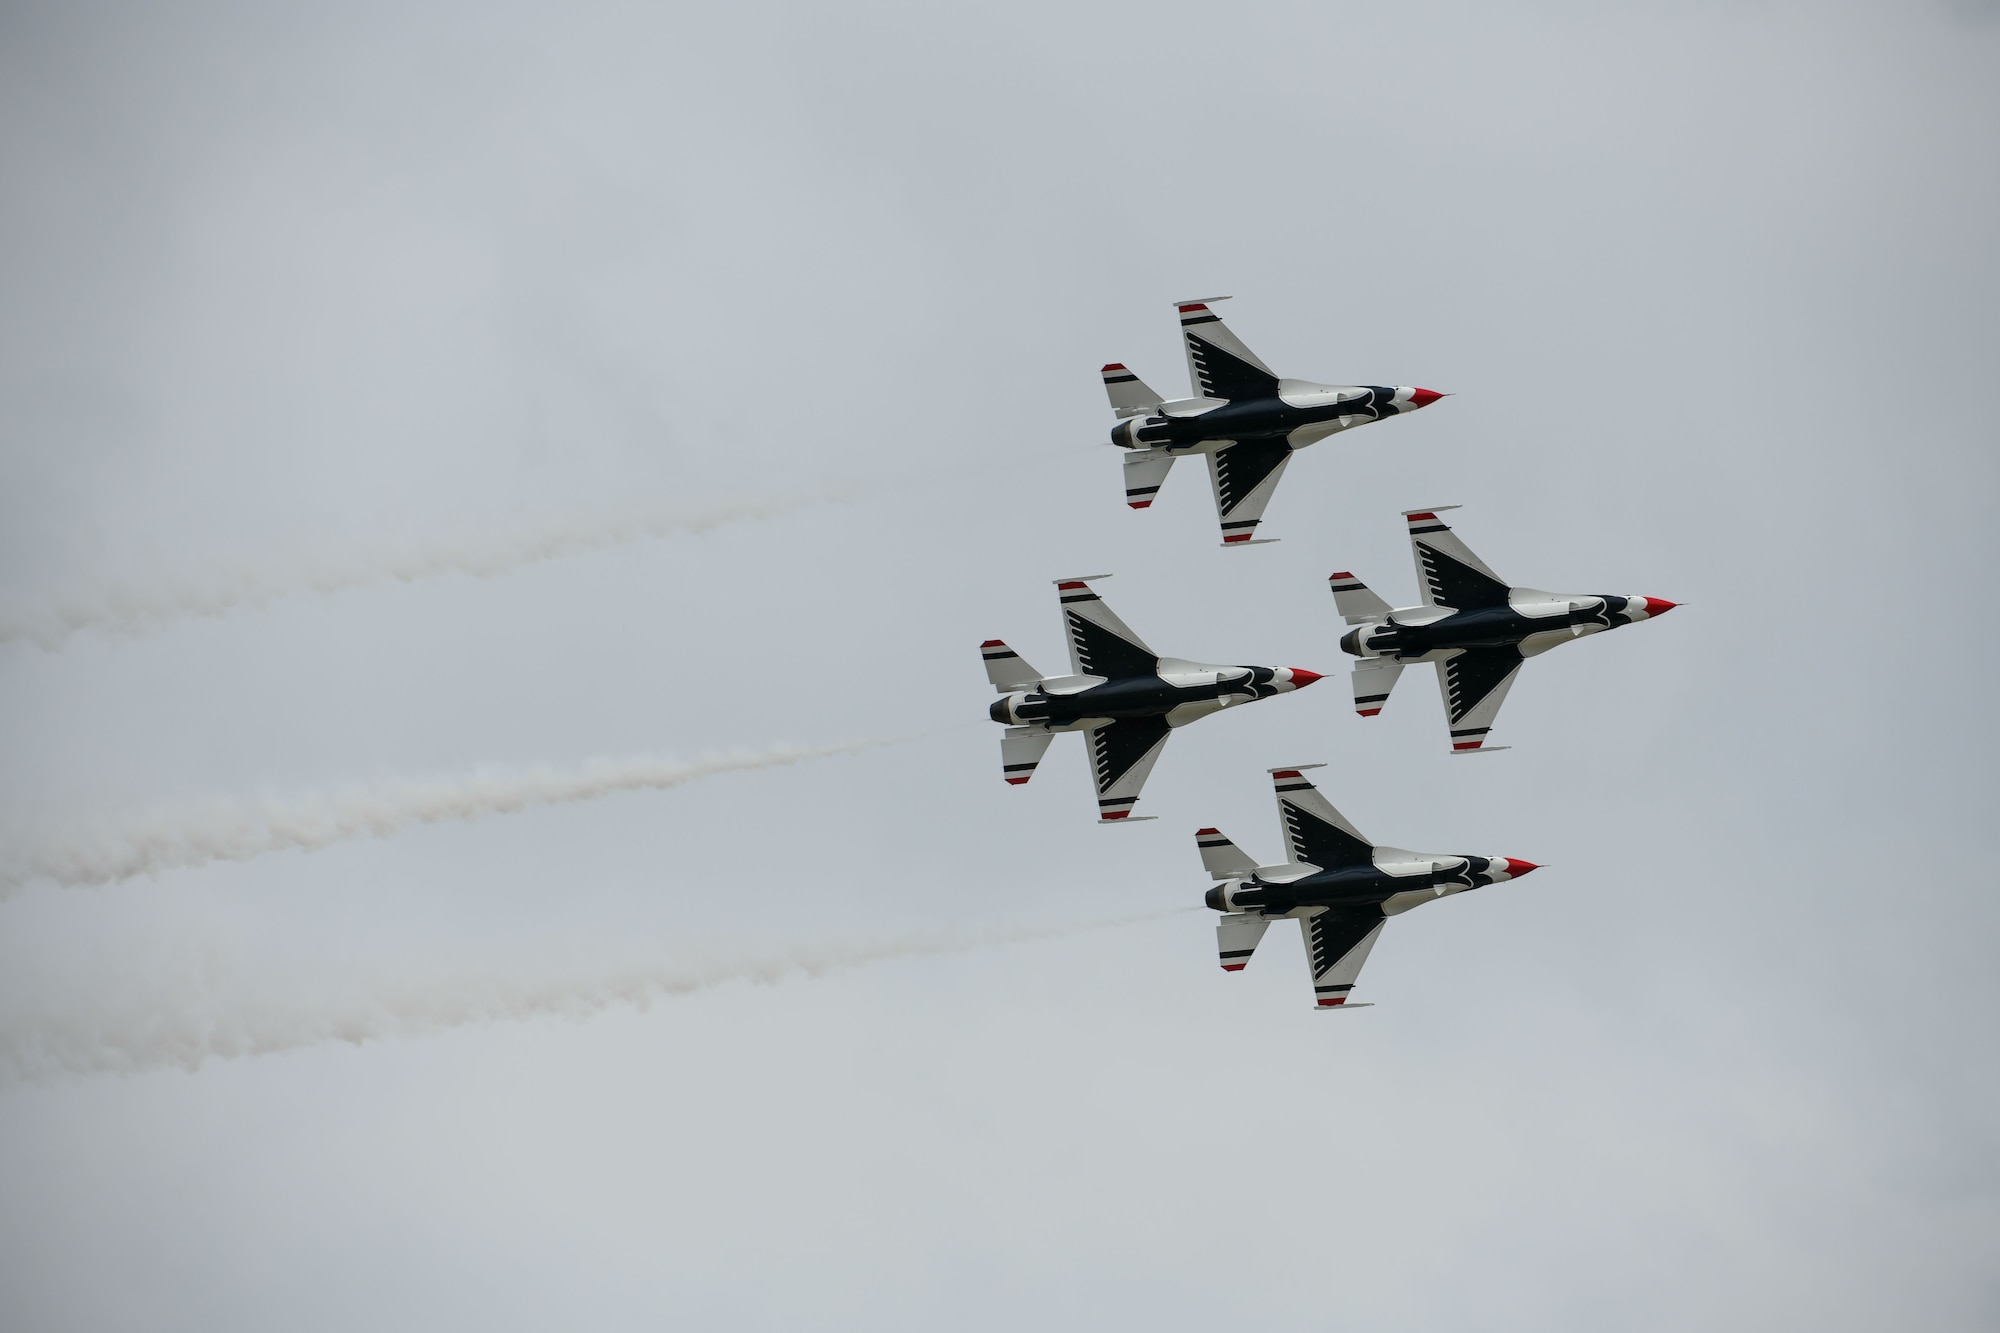 The U.S. Air Force Thunderbirds perform during the Fairchild Skyfest 2022 airshow at Fairchild Air Force Base, Washington, May 15, 2022. Fairchild Skyfest 2022 included the U.S. Air Force Thunderbirds, one of the Air Force’s premier demonstration teams showcasing the capabilities of the F-16 Fighting Falcon. (U.S. Air Force photo by Airman 1st Class Jenna Bond)